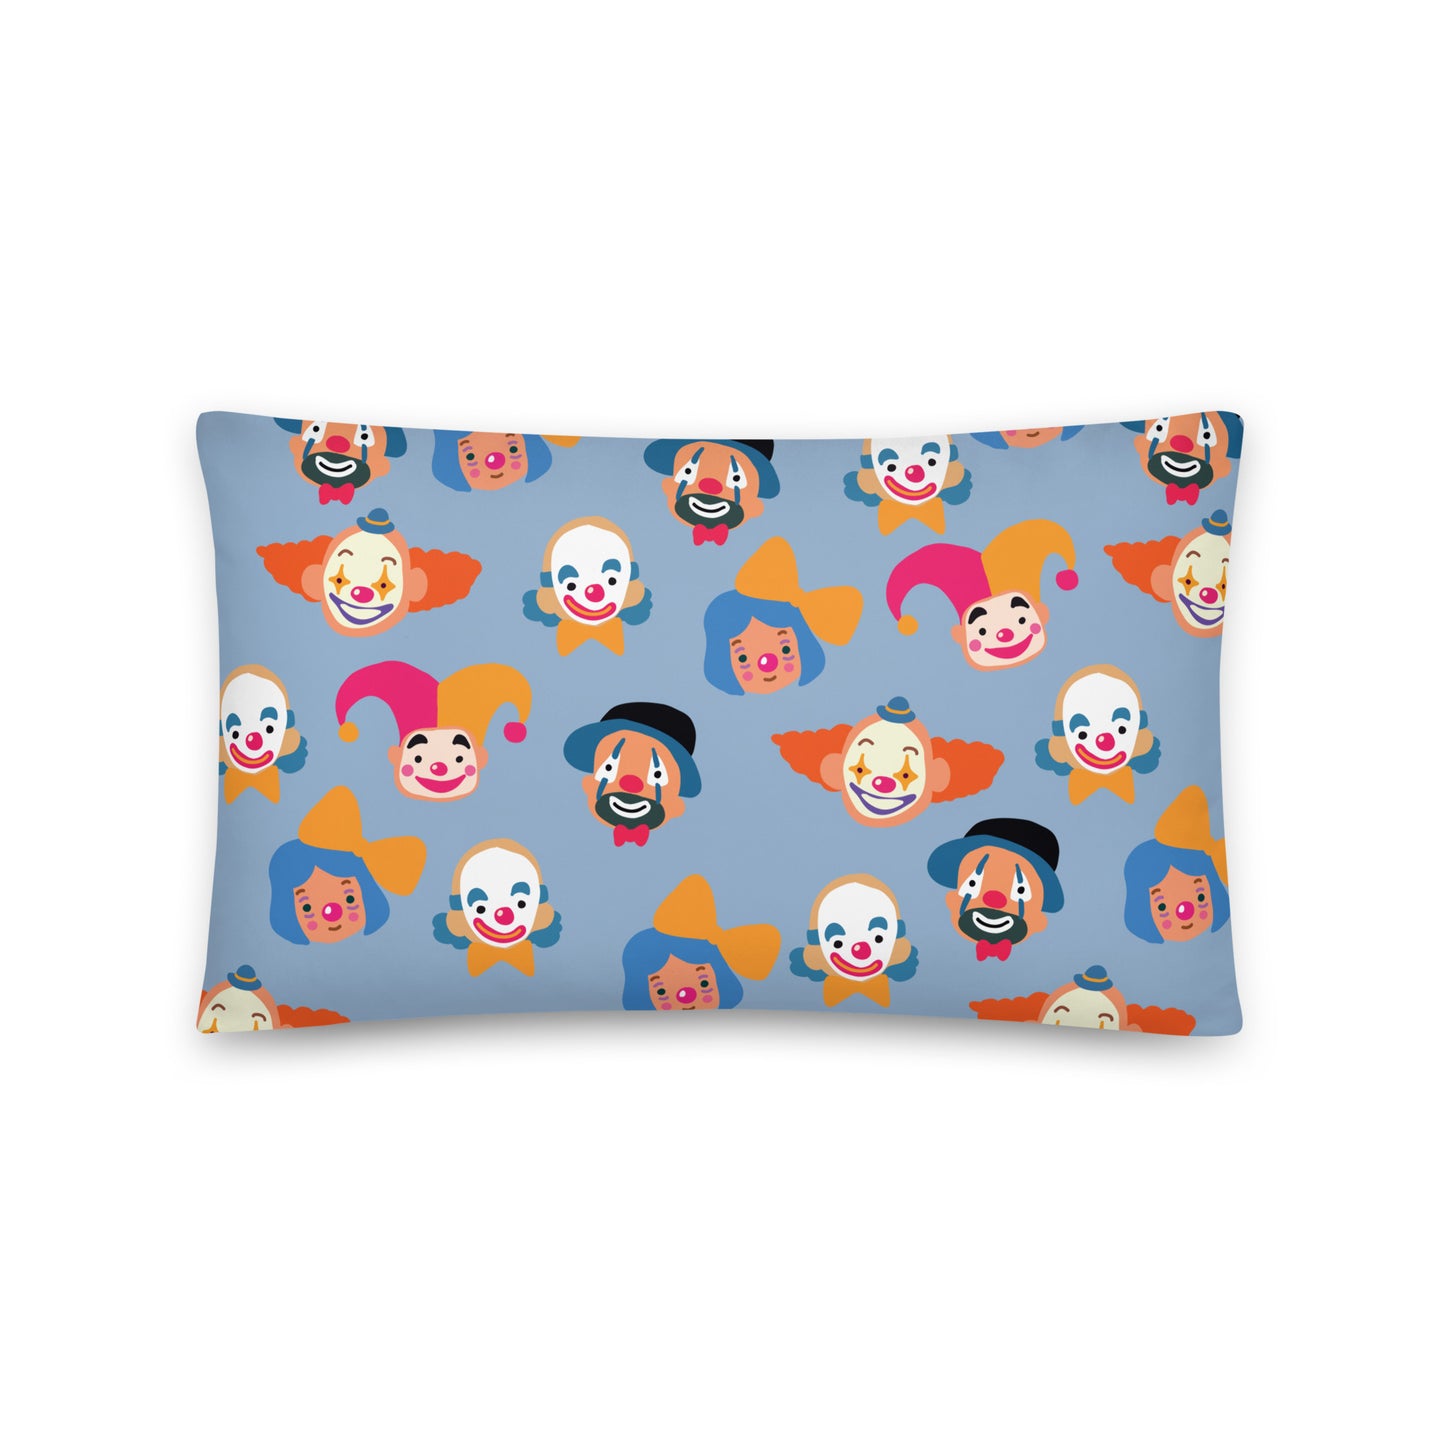 Clown - Sustainably Made Pillows